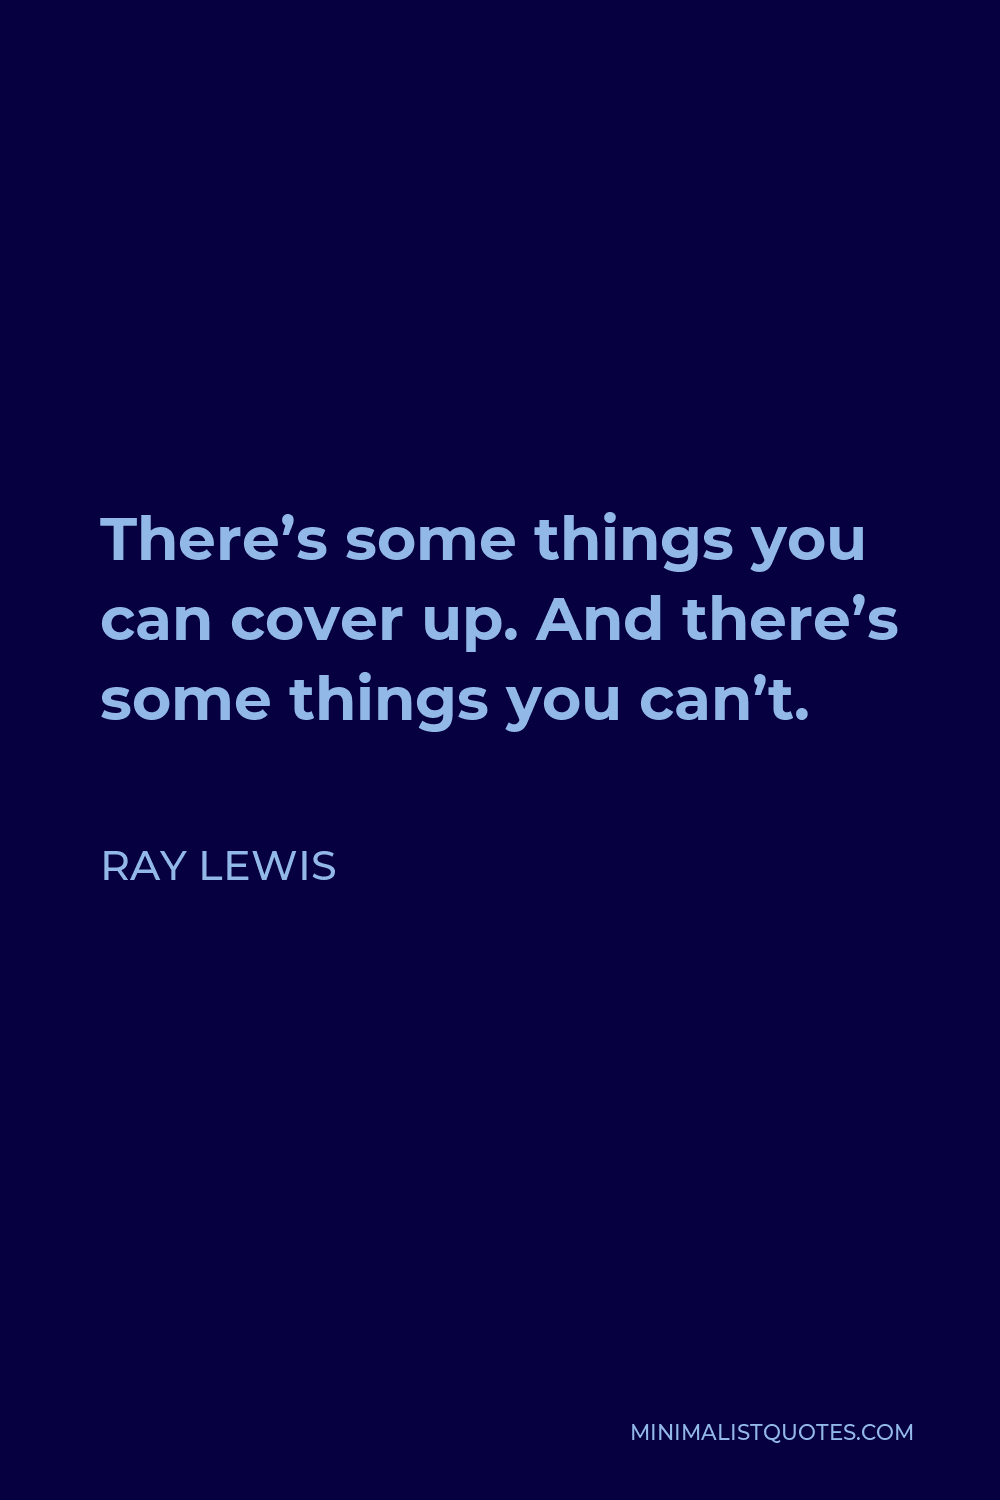 Ray Lewis Quote - There’s some things you can cover up. And there’s some things you can’t.